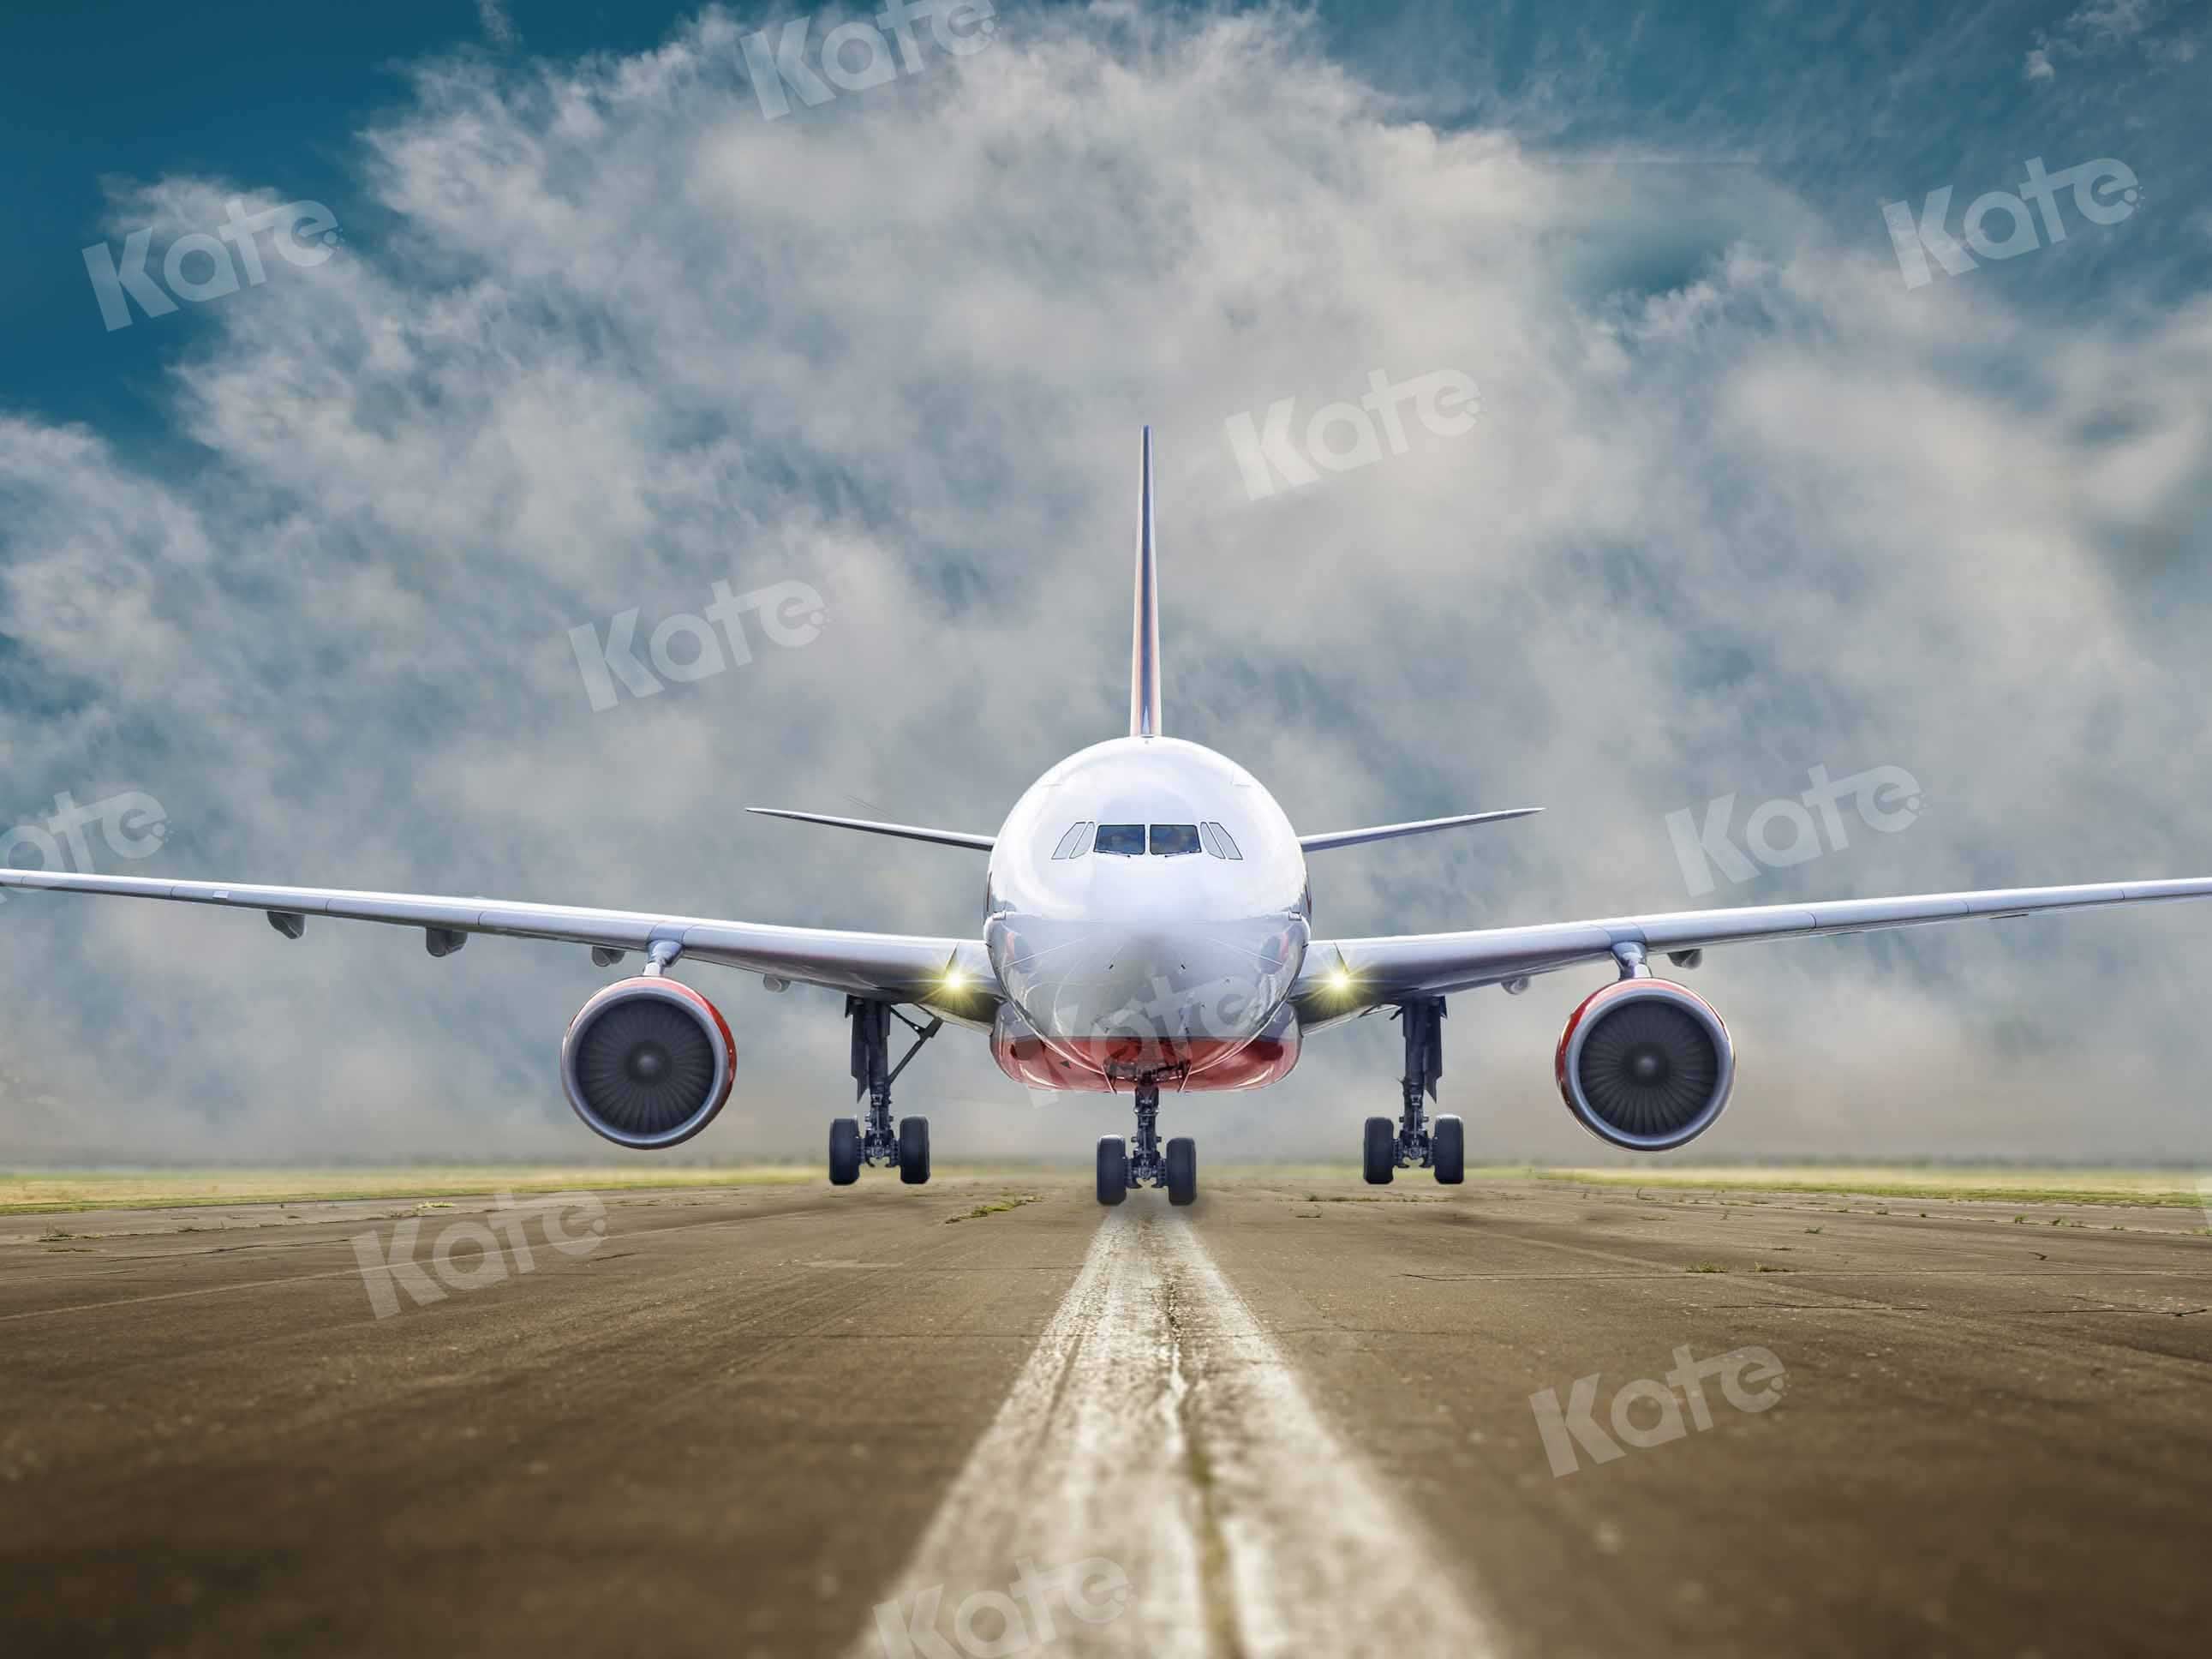 Kate Plane Backdrop Airport Runway Designed by Chain Photography